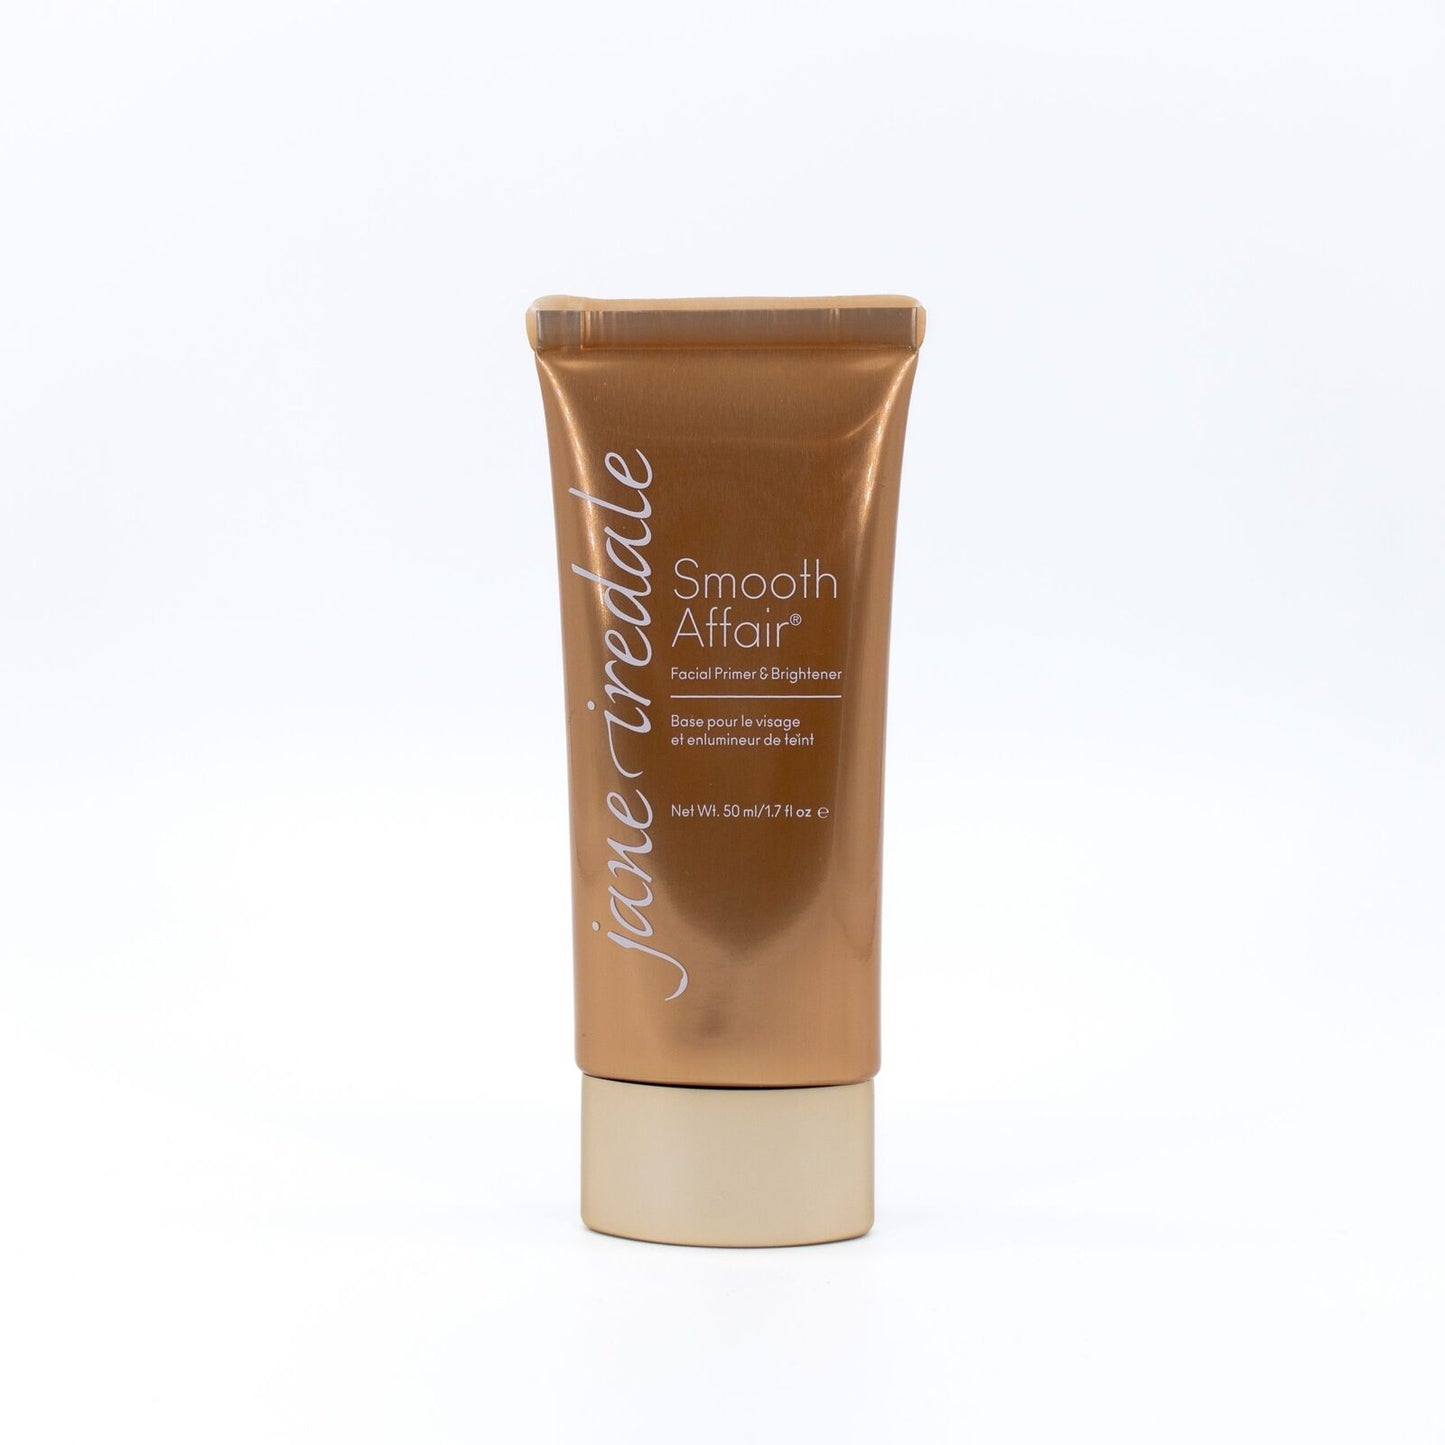 jane iredale Smooth Affair Facial Primer/Brightener 1.7oz - Small Amount Missing